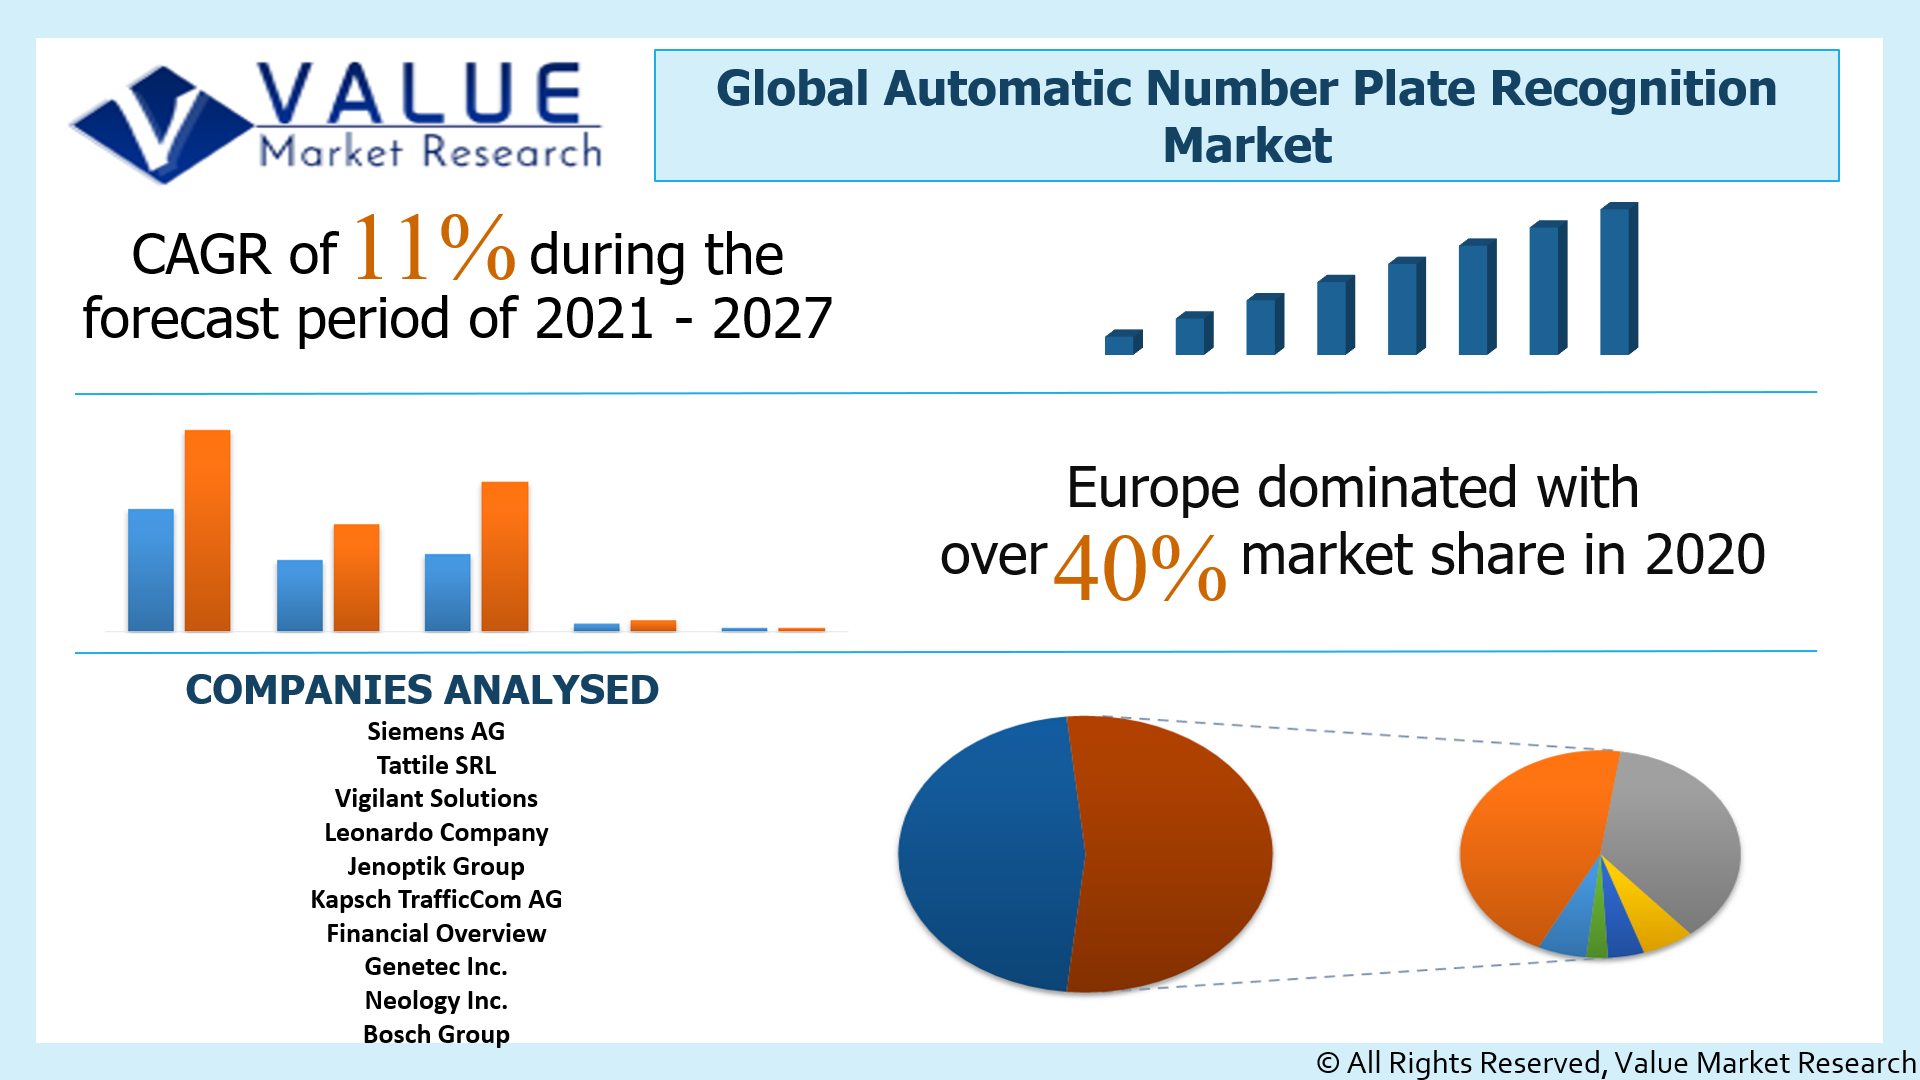 Global Automatic Number Plate Recognition Market Share